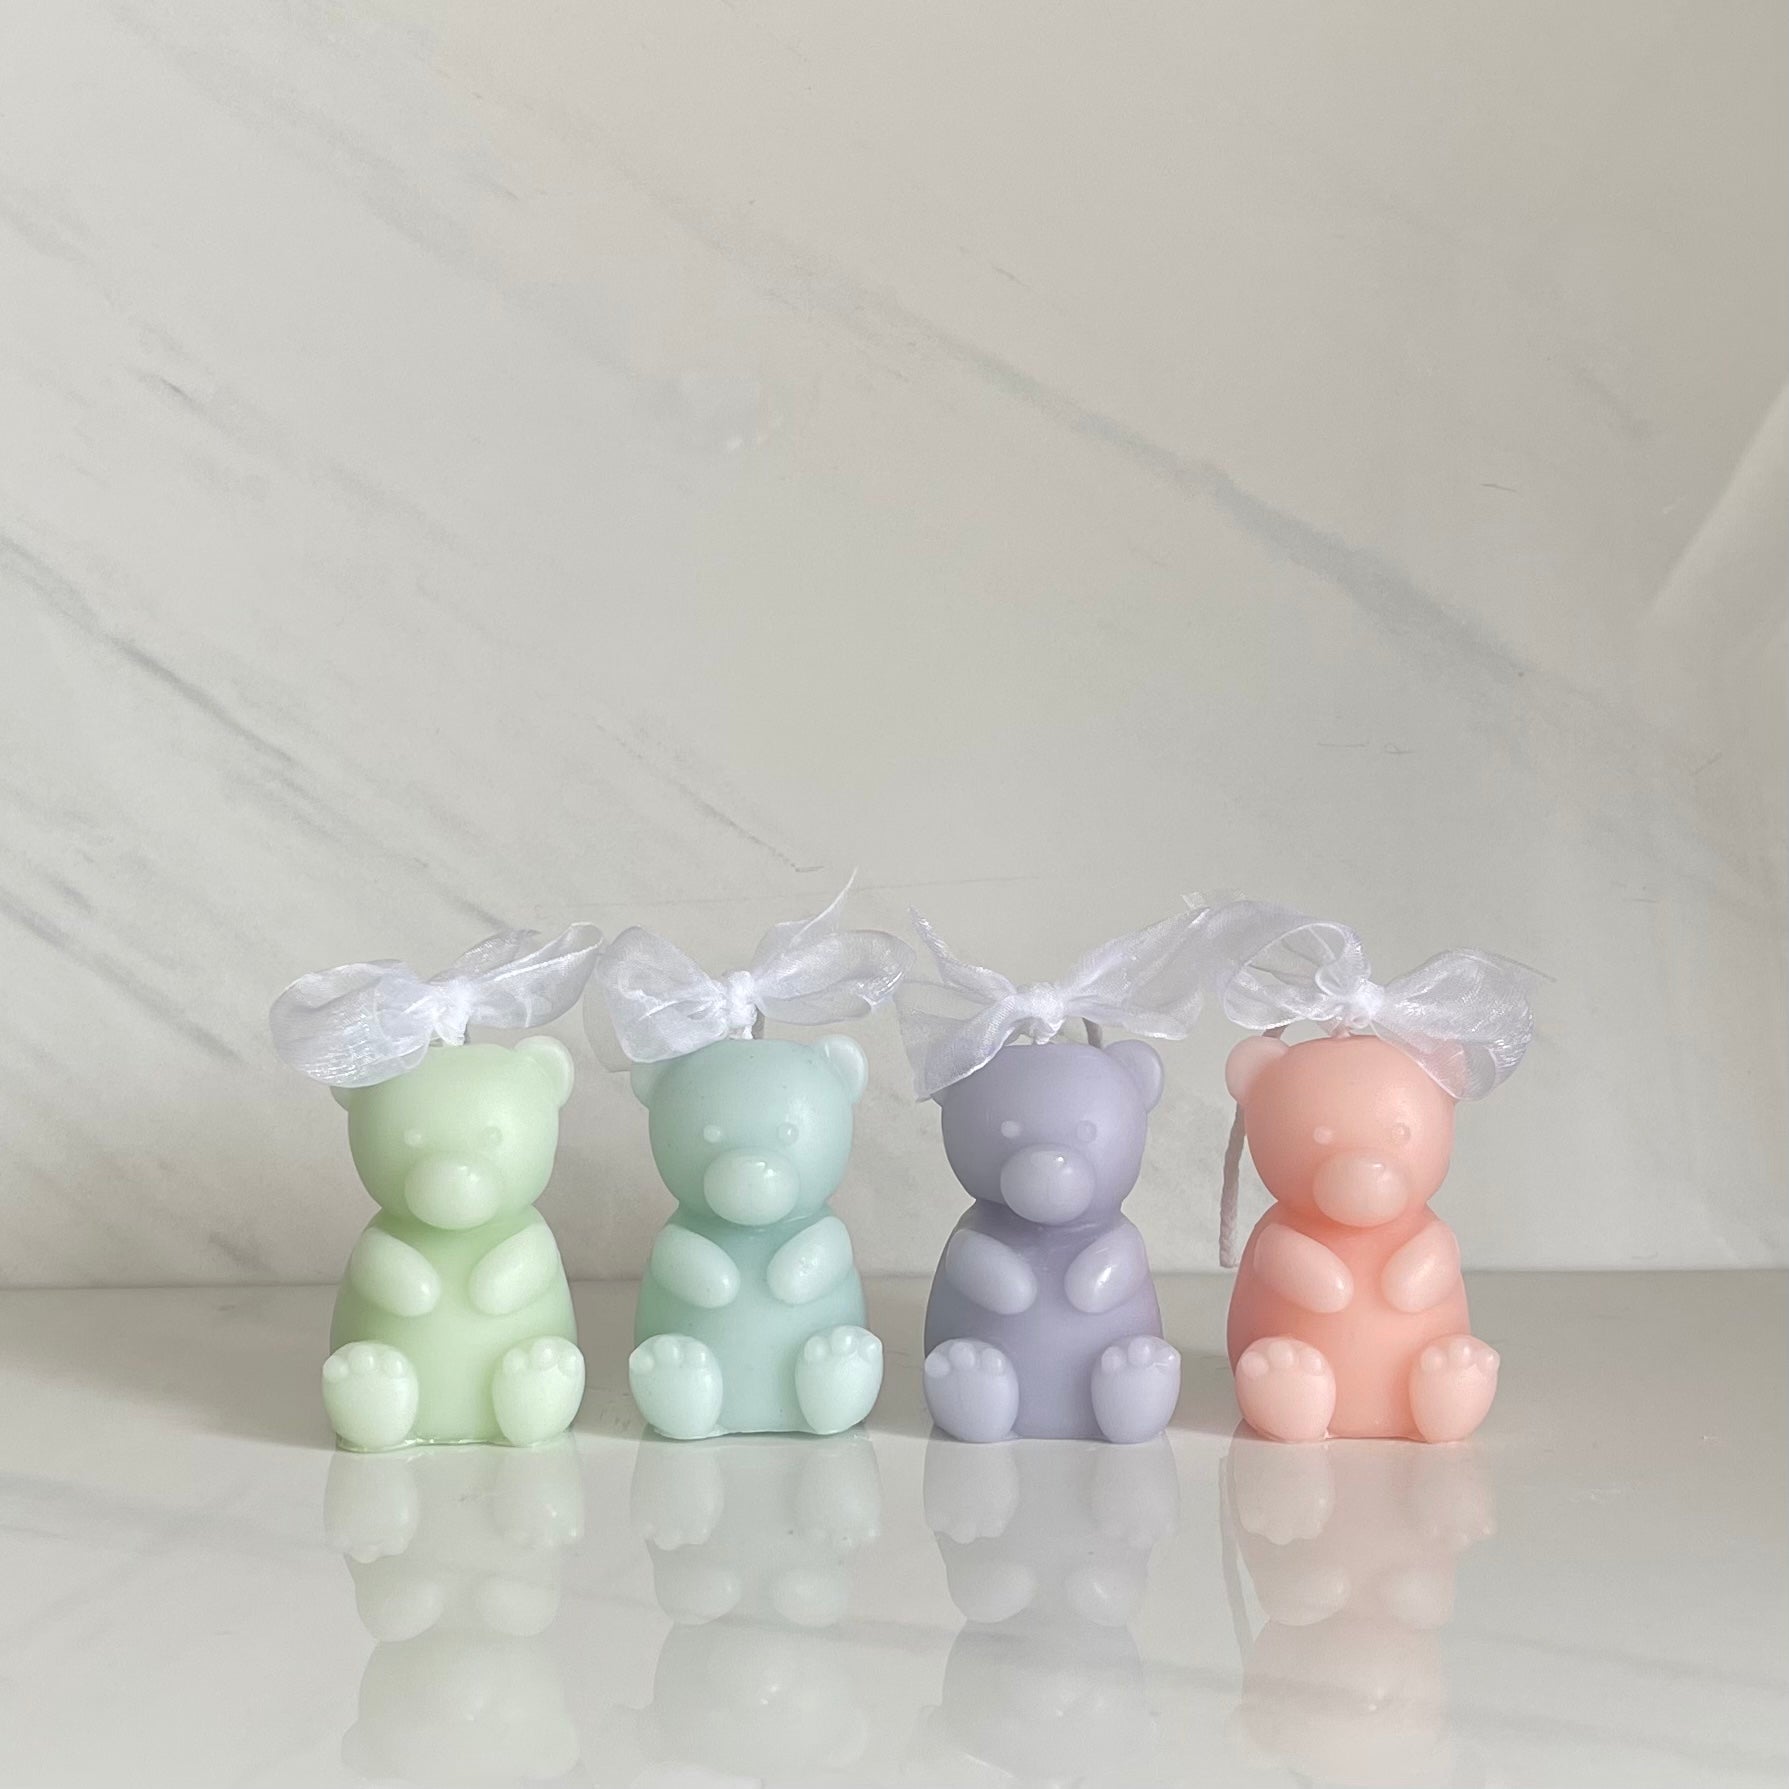 The Pastel Baby Bears